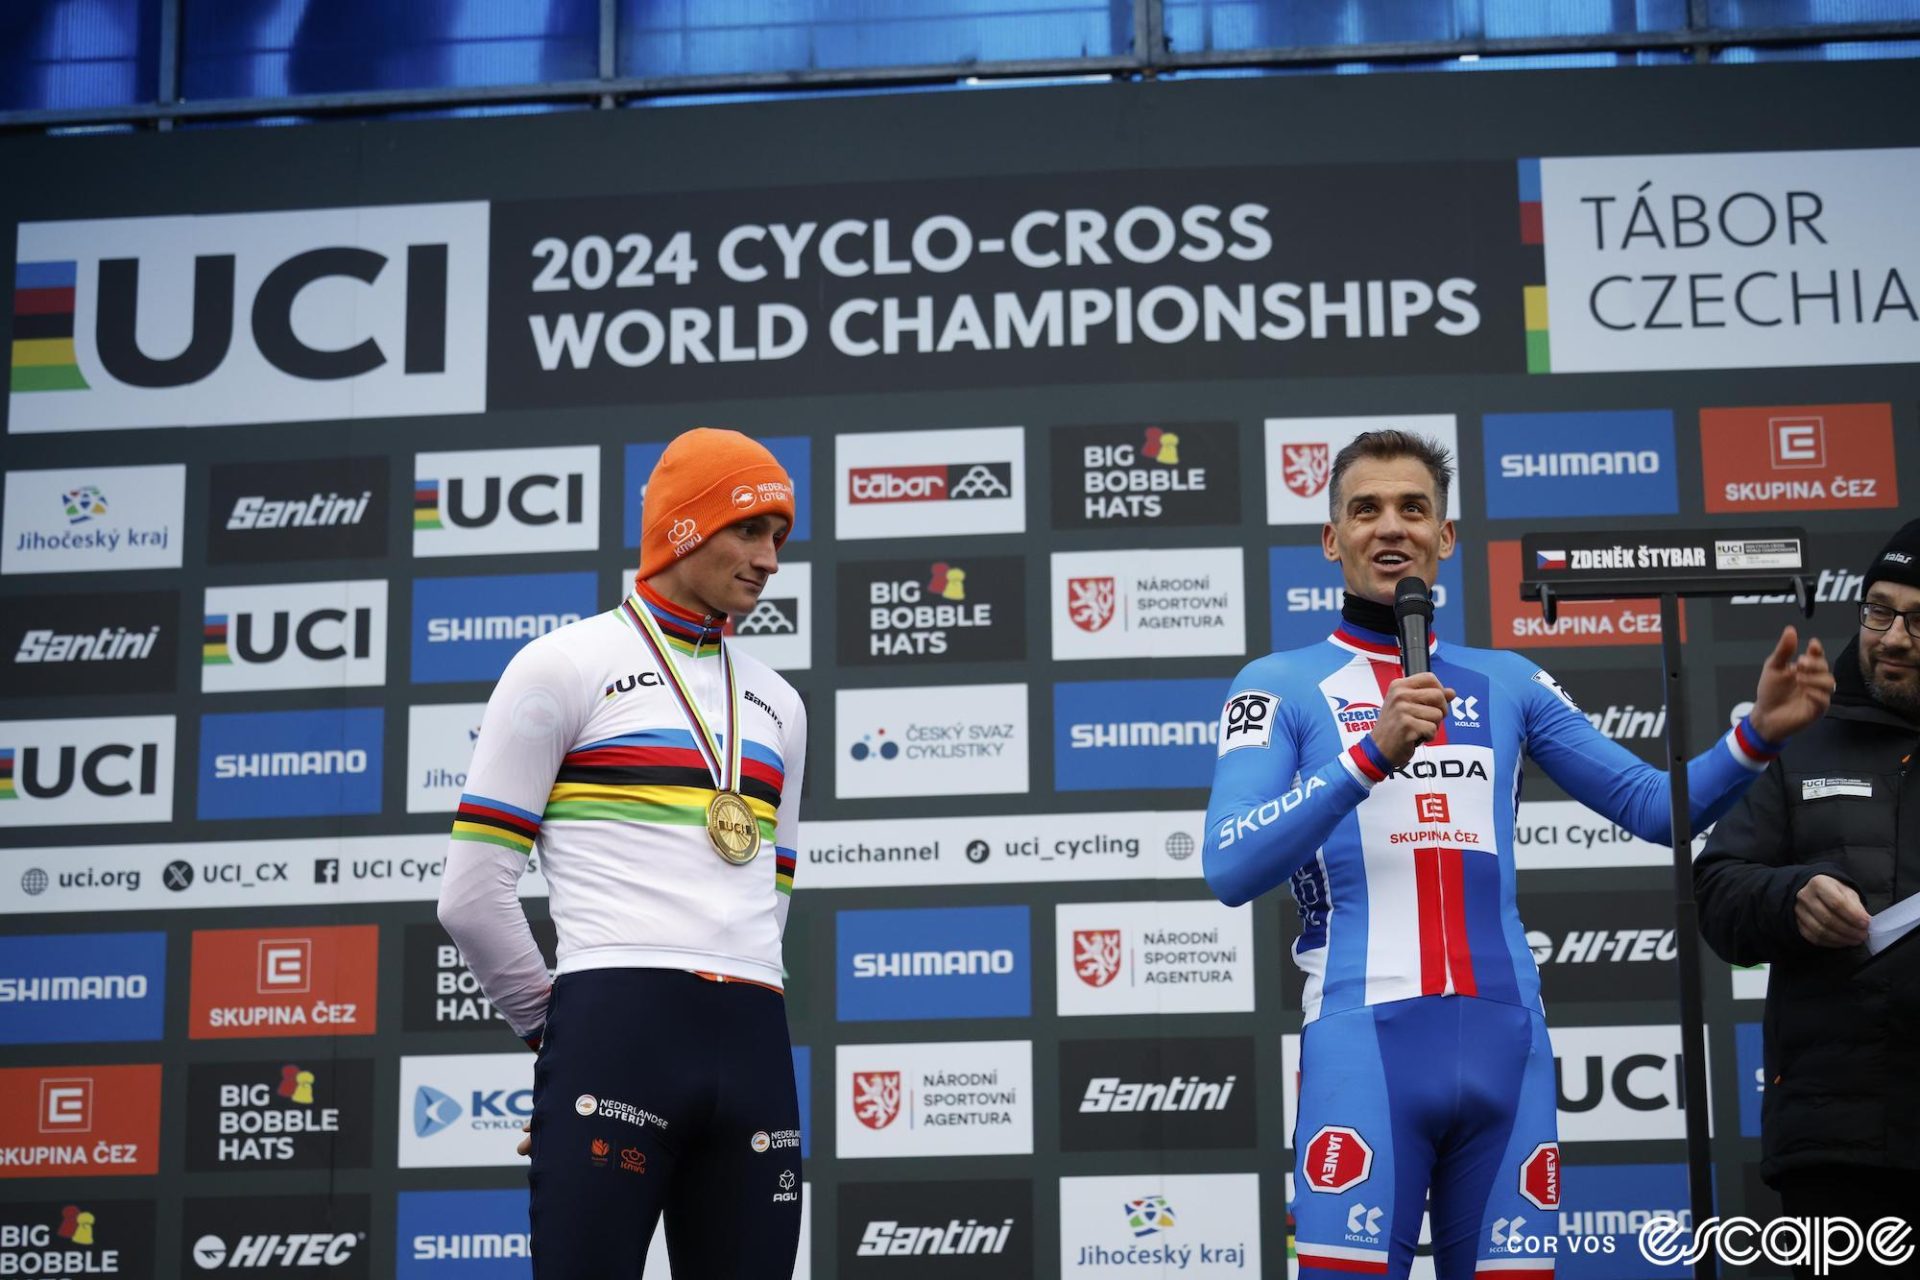 Zdenek Stybar holds a microphone as he addresses the crowd at the 2024 World Cyclocross Championships. He is standing on the podium, while next to him, winner and six-time World Champion Mathieu van der Poel looks on with respect.